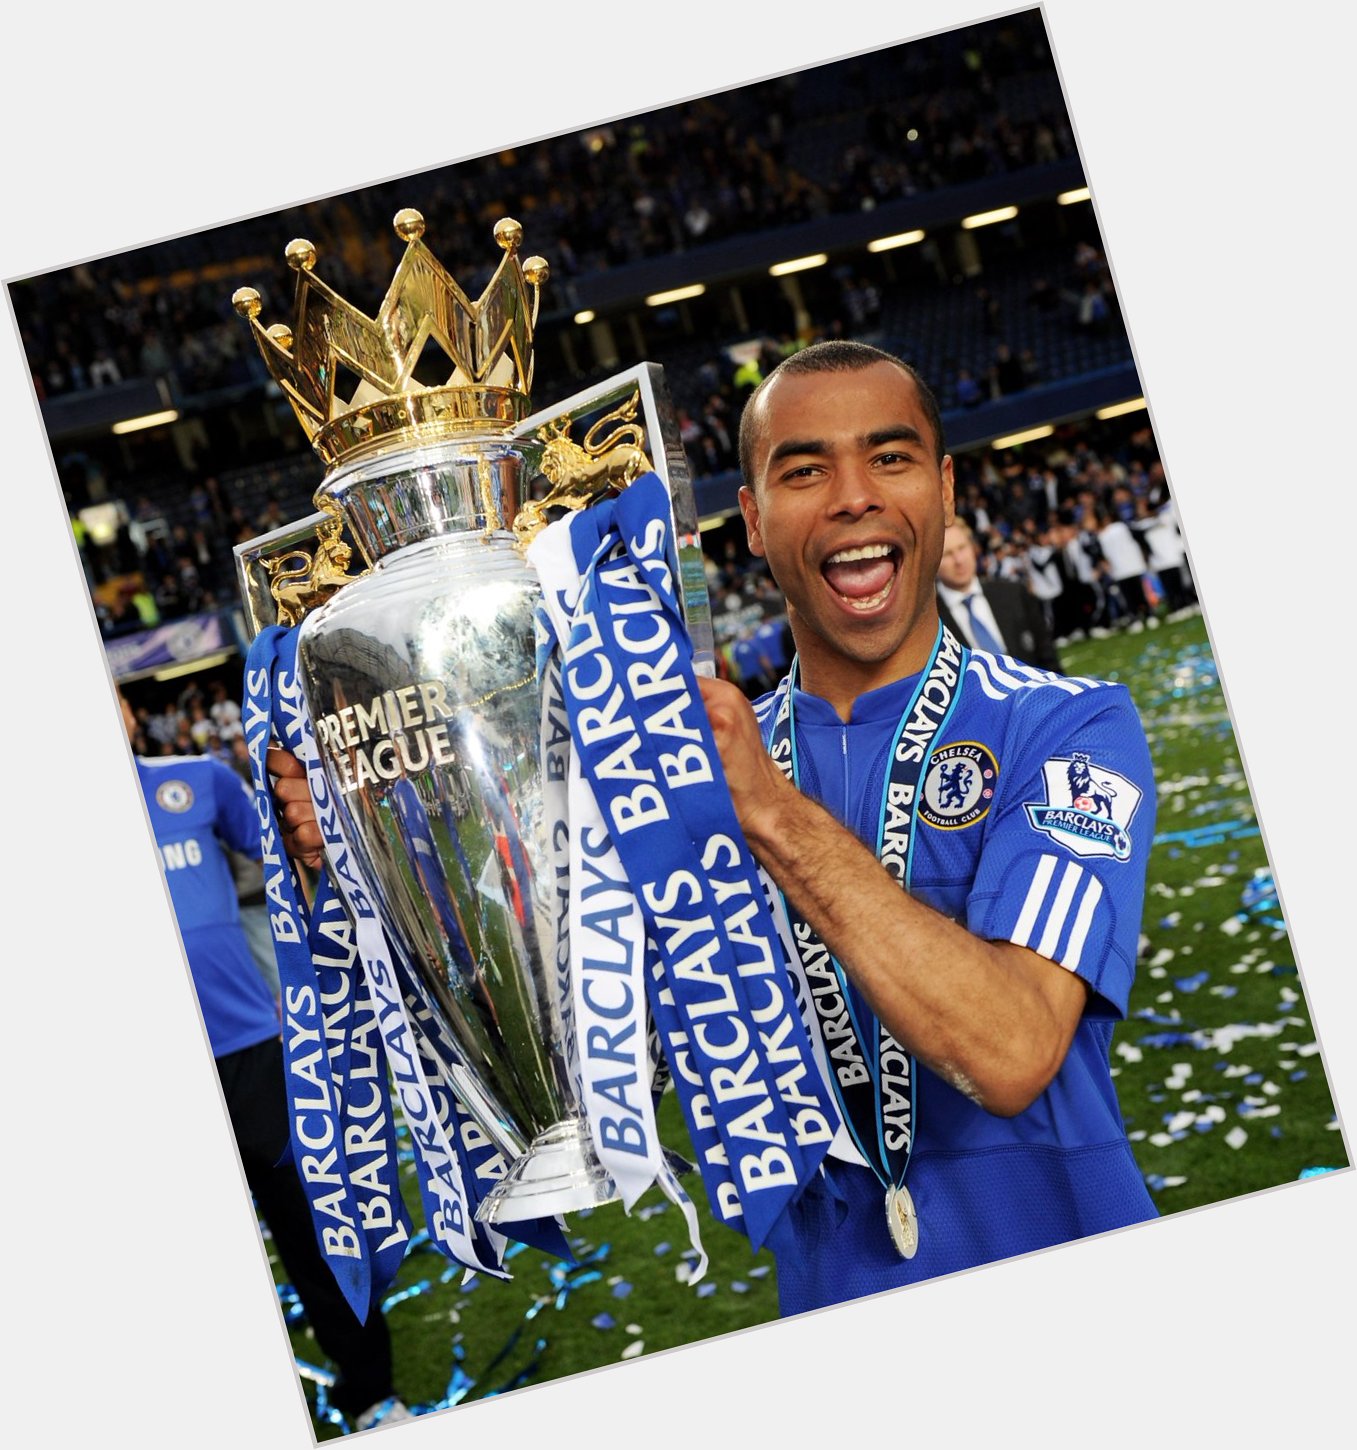   Happy birthday to Chelsea legend Ashley Cole - 34 today! 